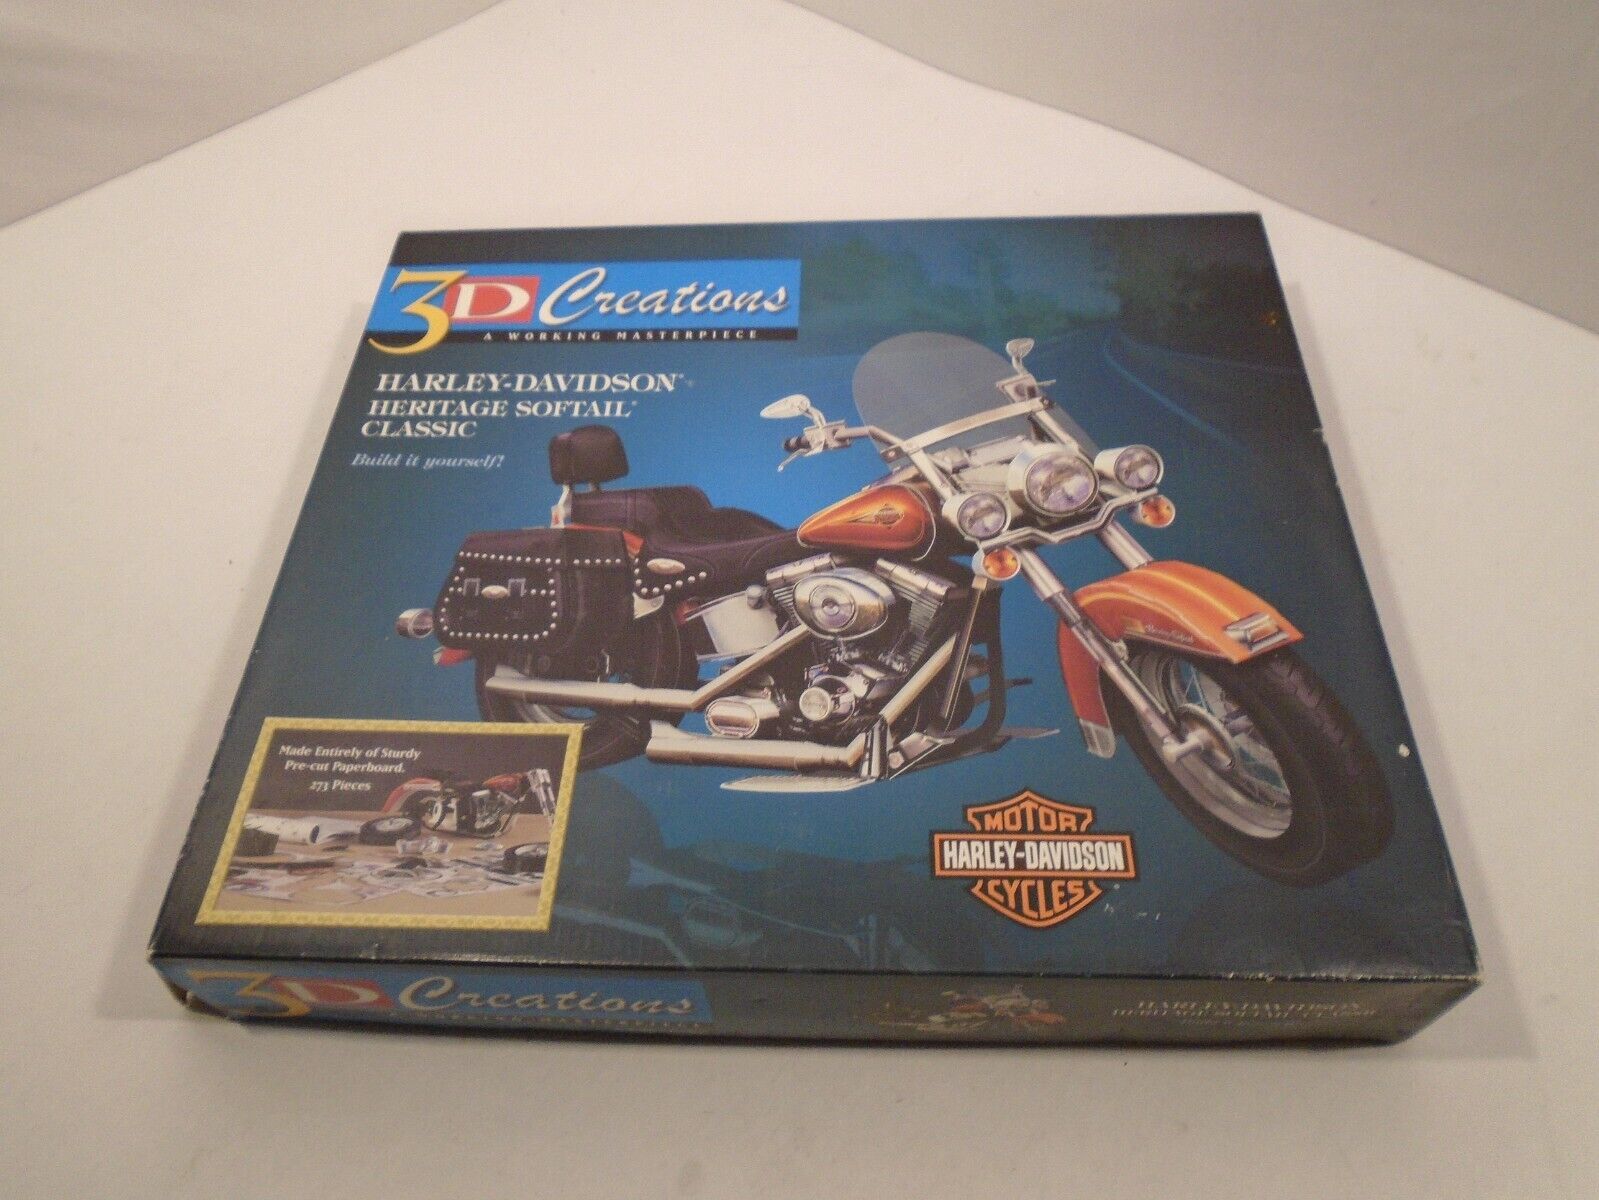 3D Creations Harley Davidson Heritage Softail Classic preowned Never assembled